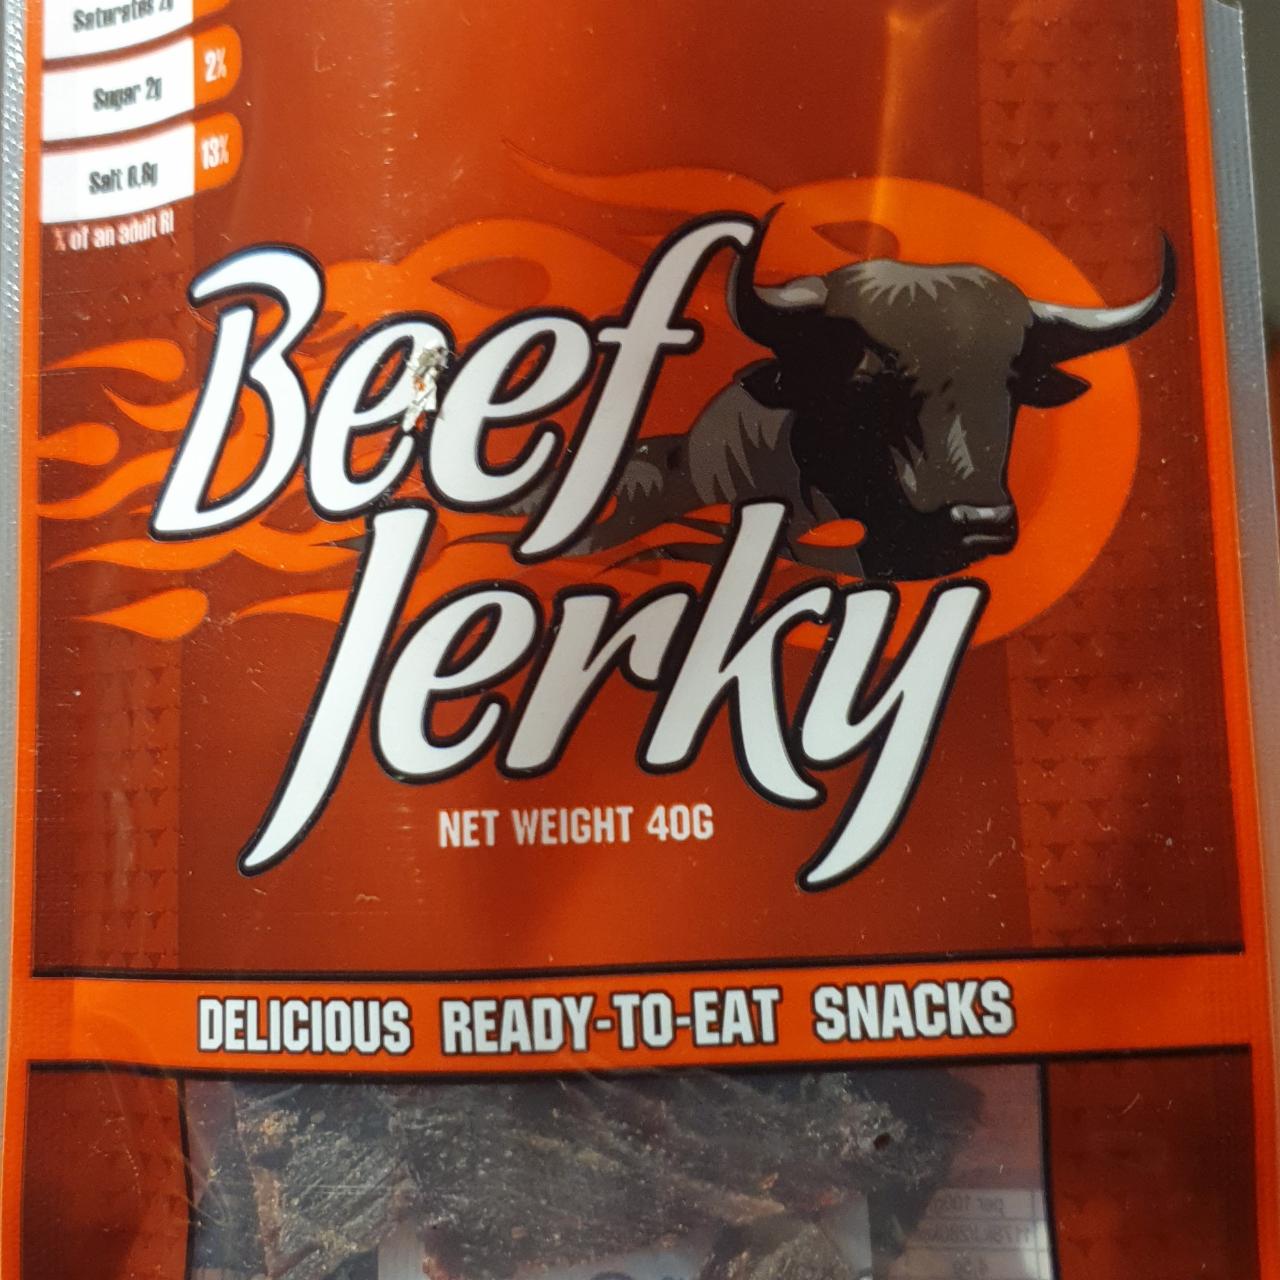 Fotografie - Beef jerky barbecue Ready to eat